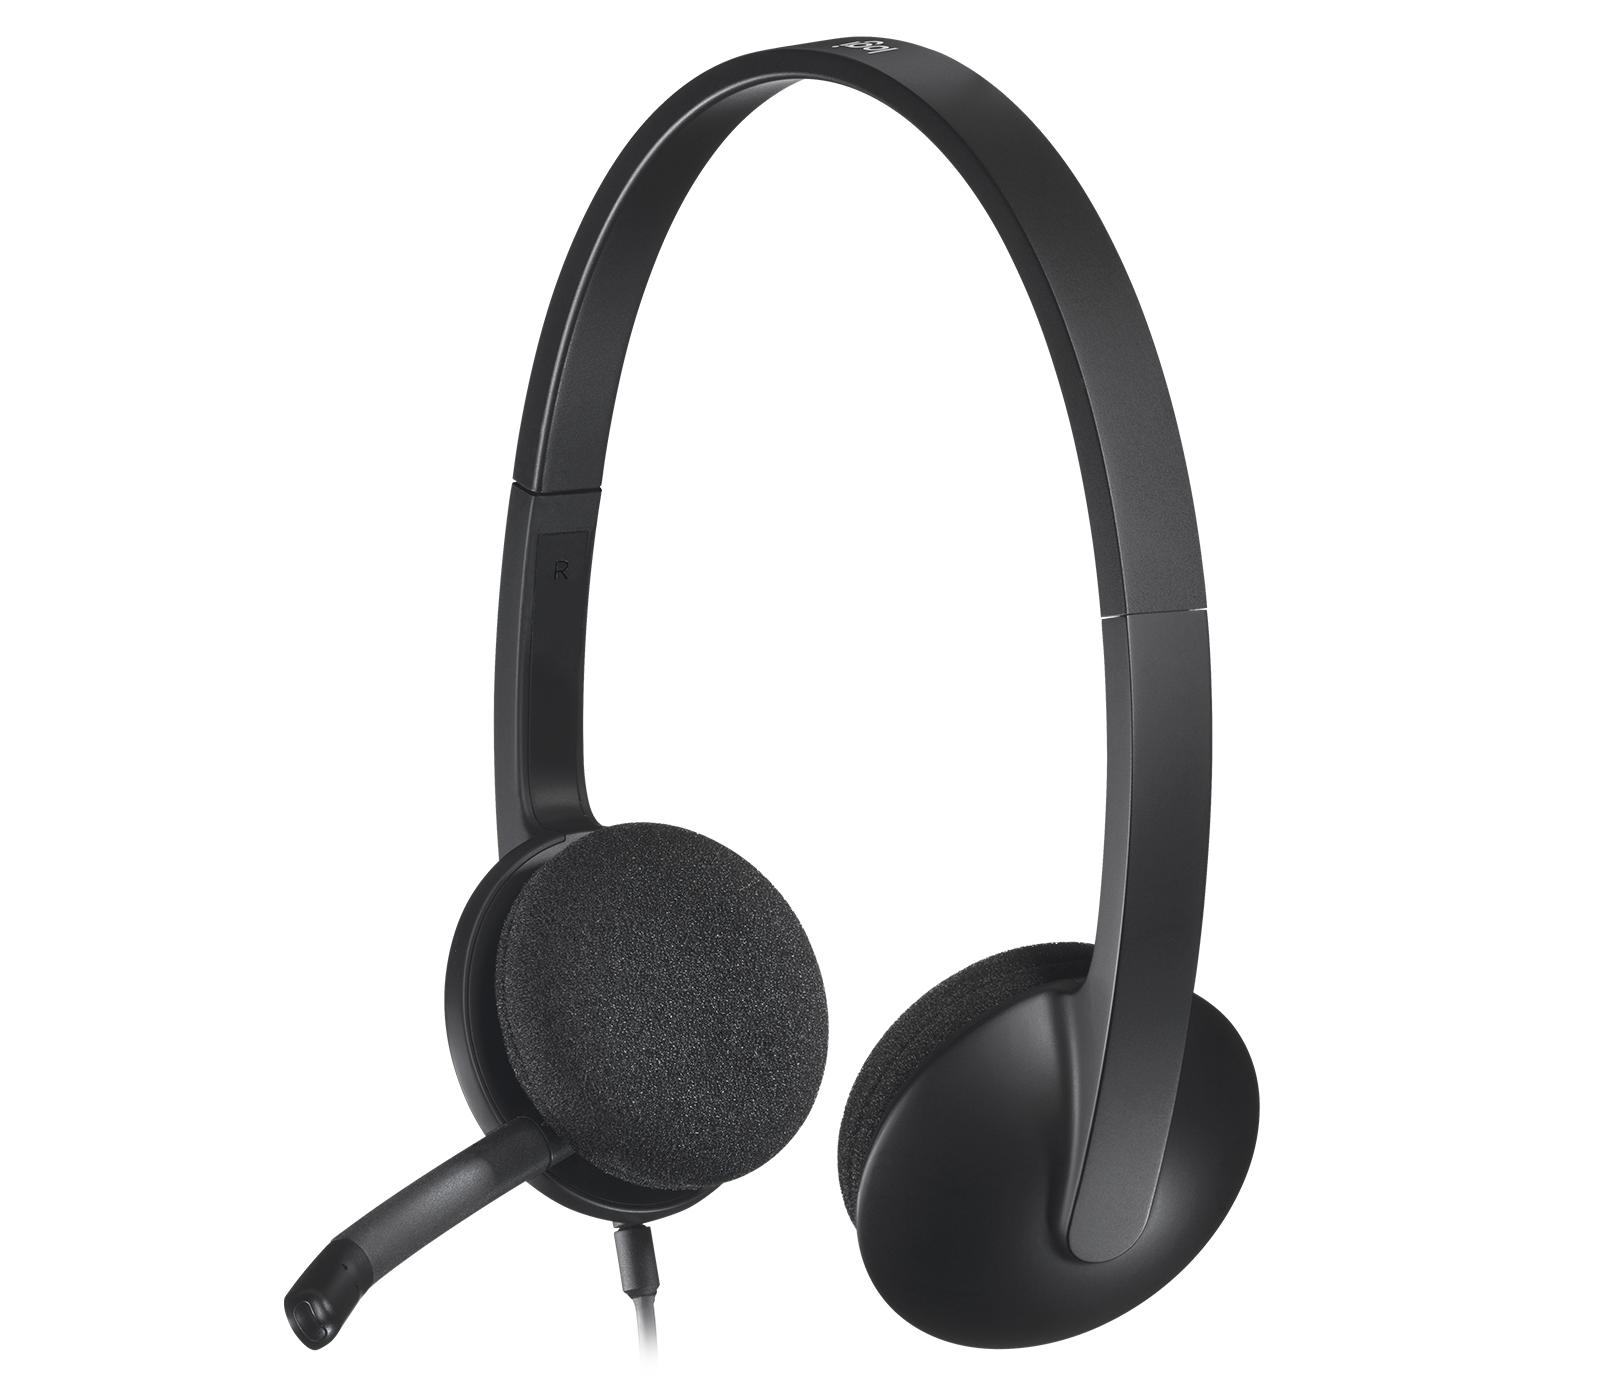 rabat Vanvid Anklage Logitech H340 USB PC Headset with Noise-Cancelling Mic